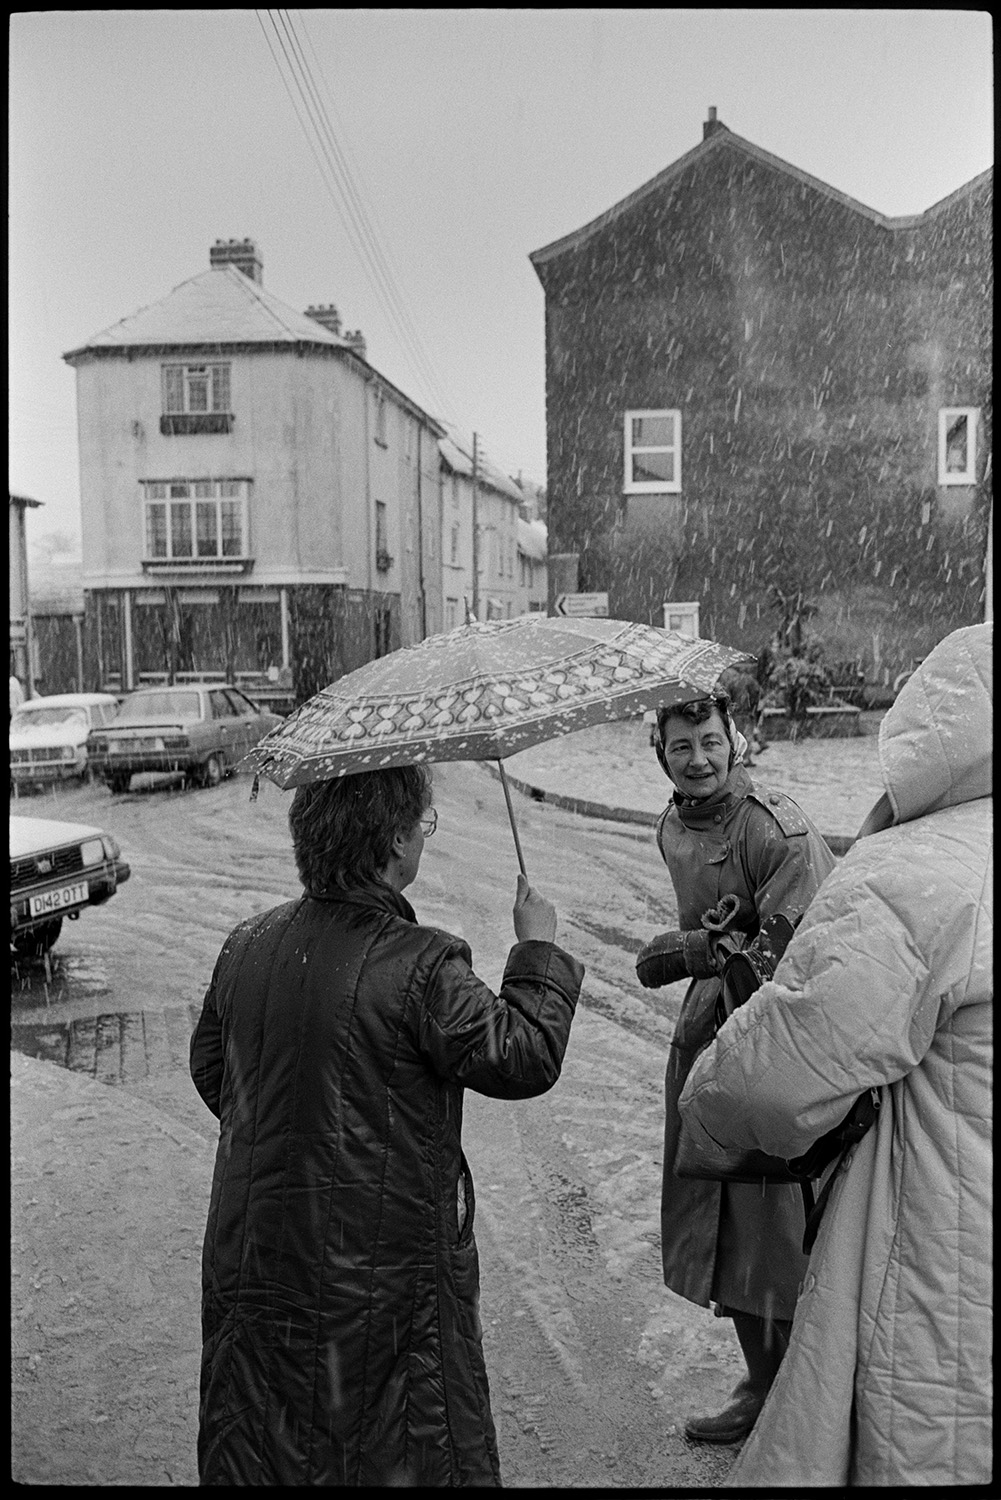 Snow, street scenes with people coming out of coffee morning. 
[Three women talking under an umbrella in Fore Street, Chulmleigh. Snow is falling and settling on the road.]